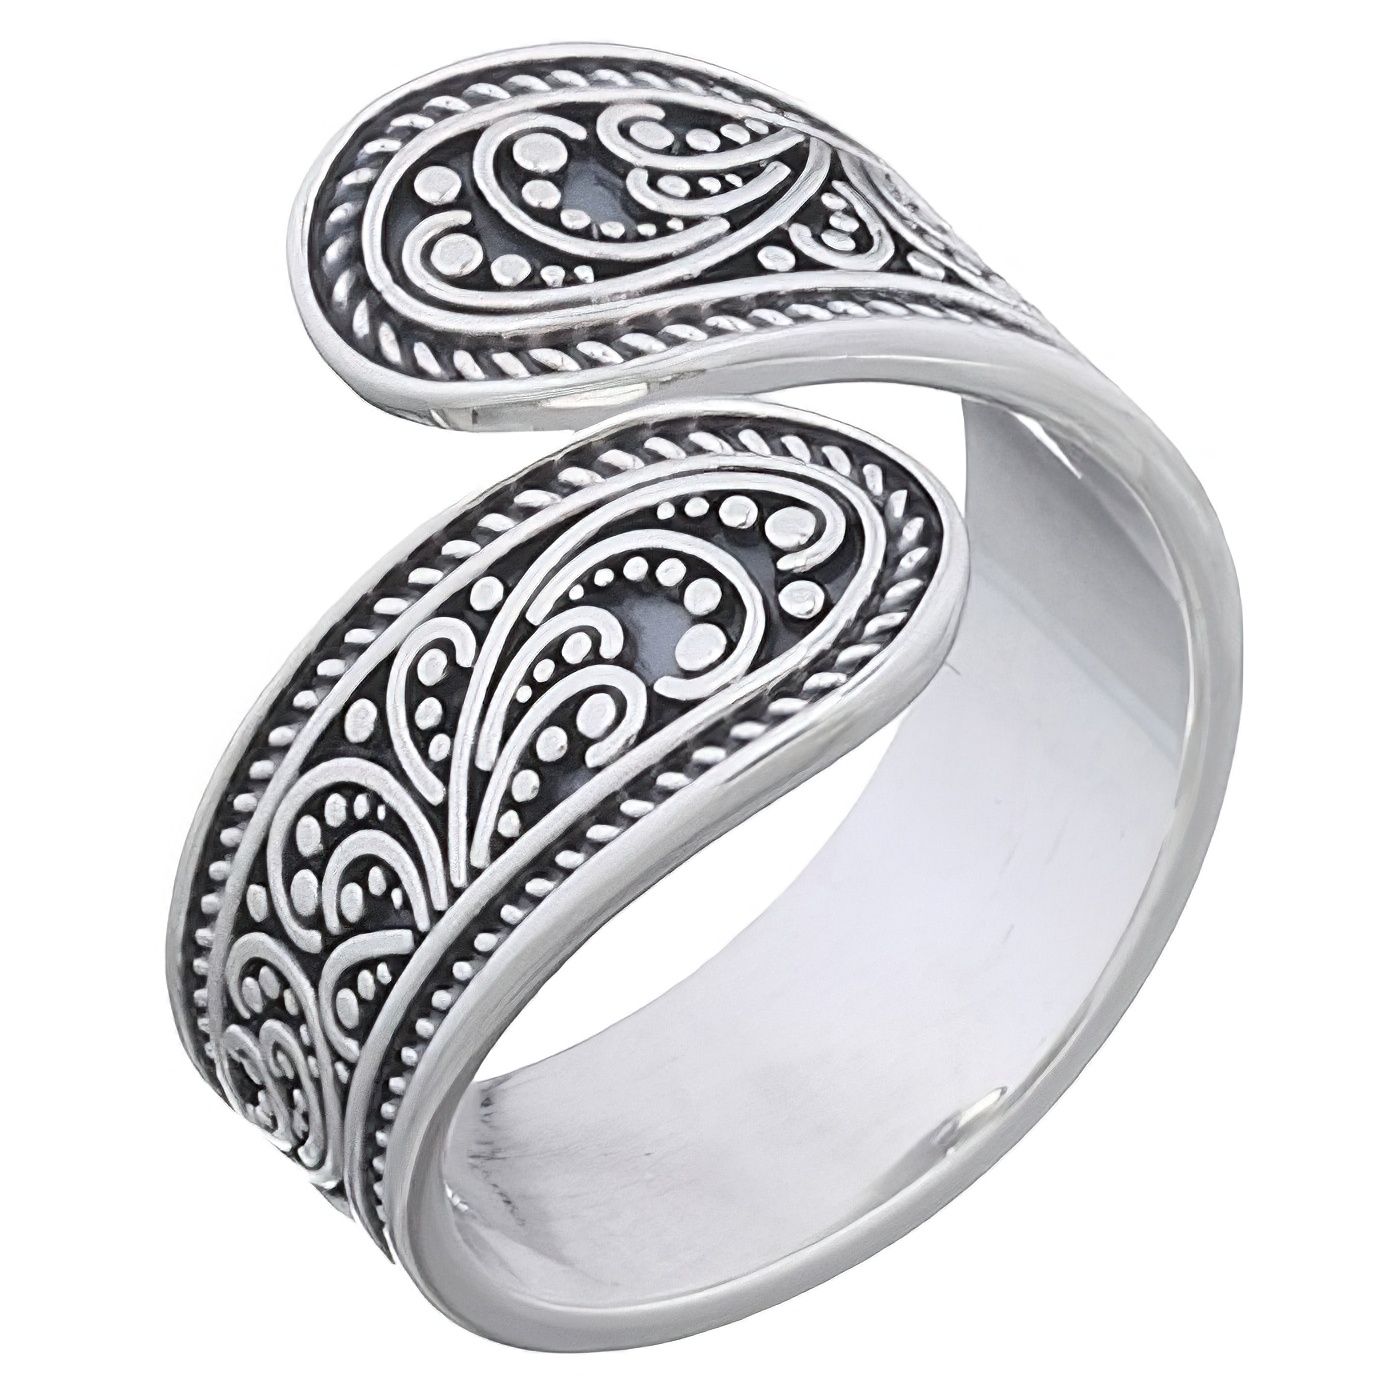 Stunning Ornamented Style Open Ring 925 Sterling Silver by BeYindi 